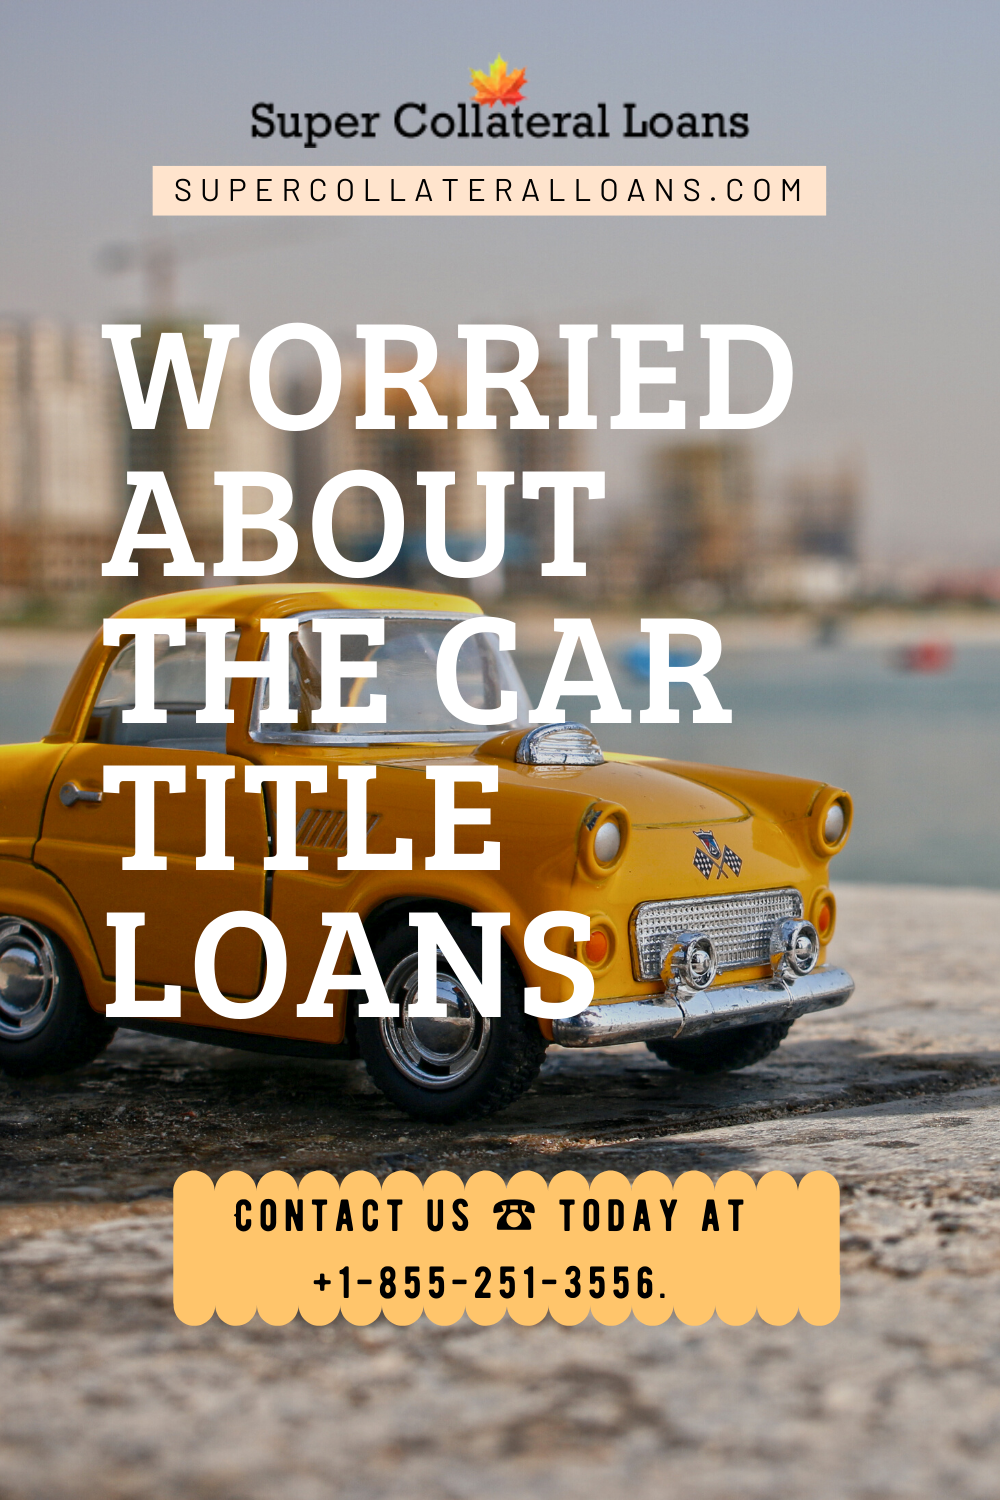 How to apply for personal loan with car title as collateral Best